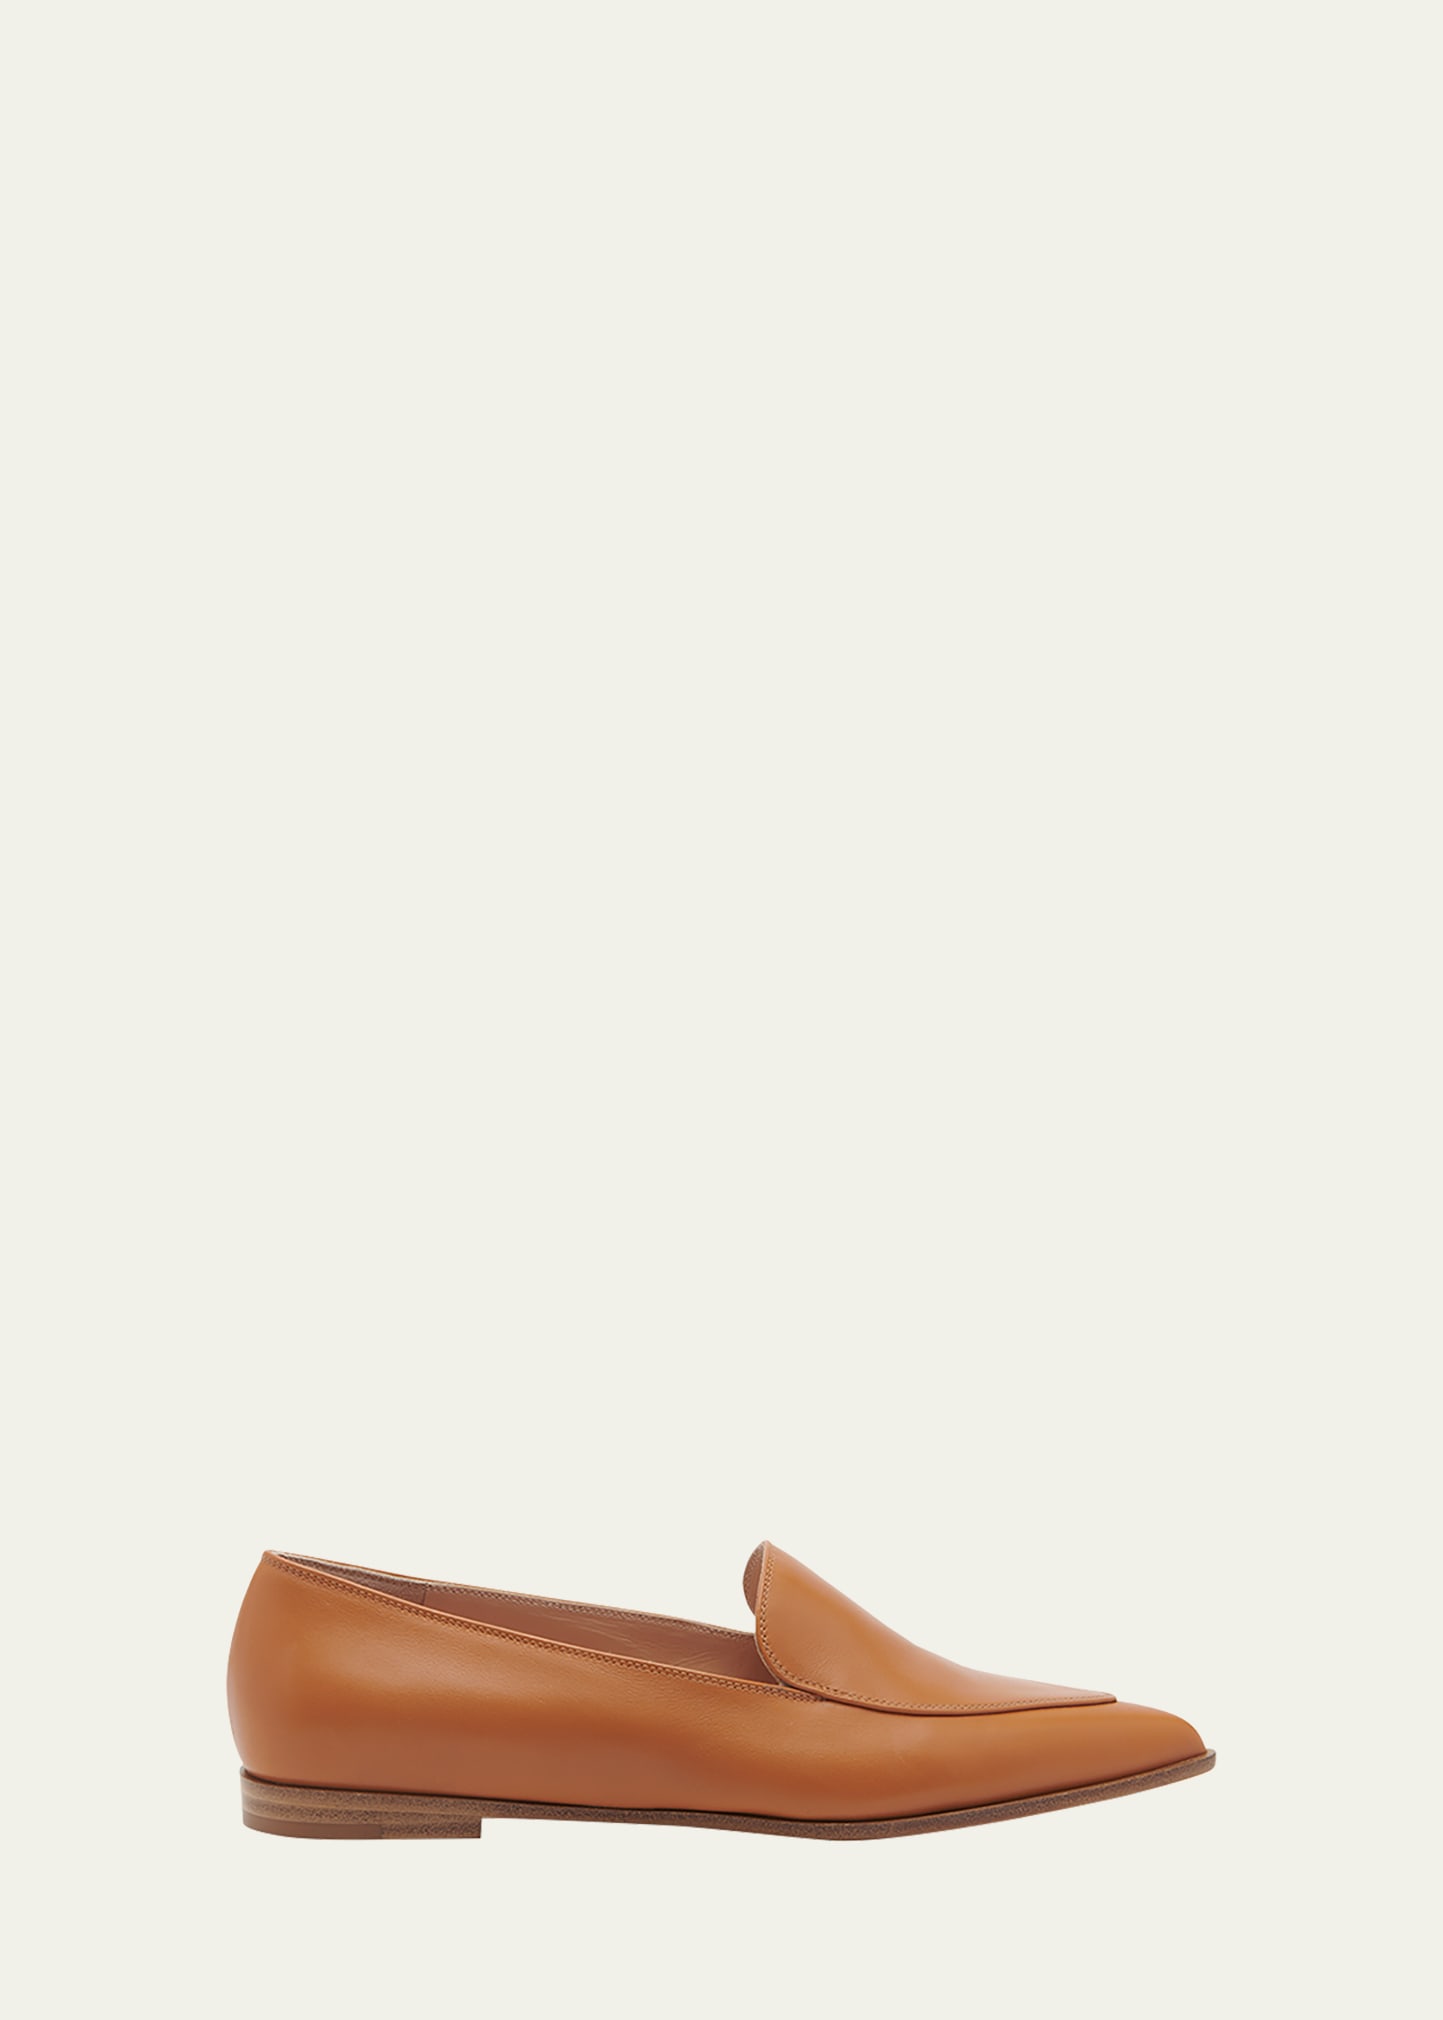 GIANVITO ROSSI LEATHER POINT-TOE BALLERINA LOAFERS